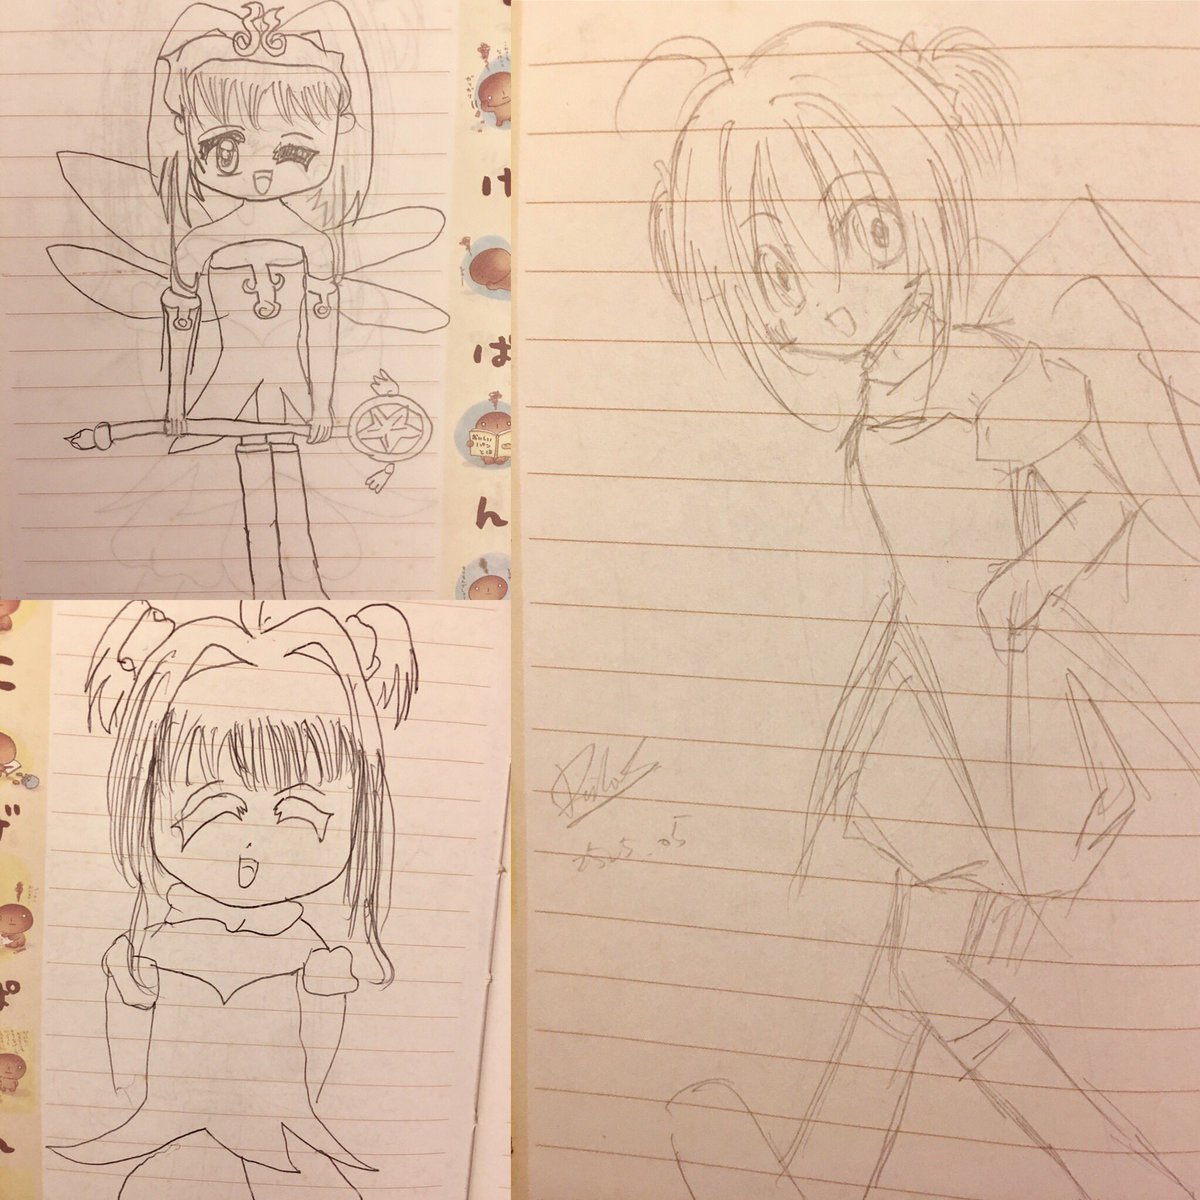 These were from 1998 and 2005 LMAO I drew Sakura a lot around the early 2000s when I didn't even know what digital art is...but a lot of those art were either dumped or not with me 